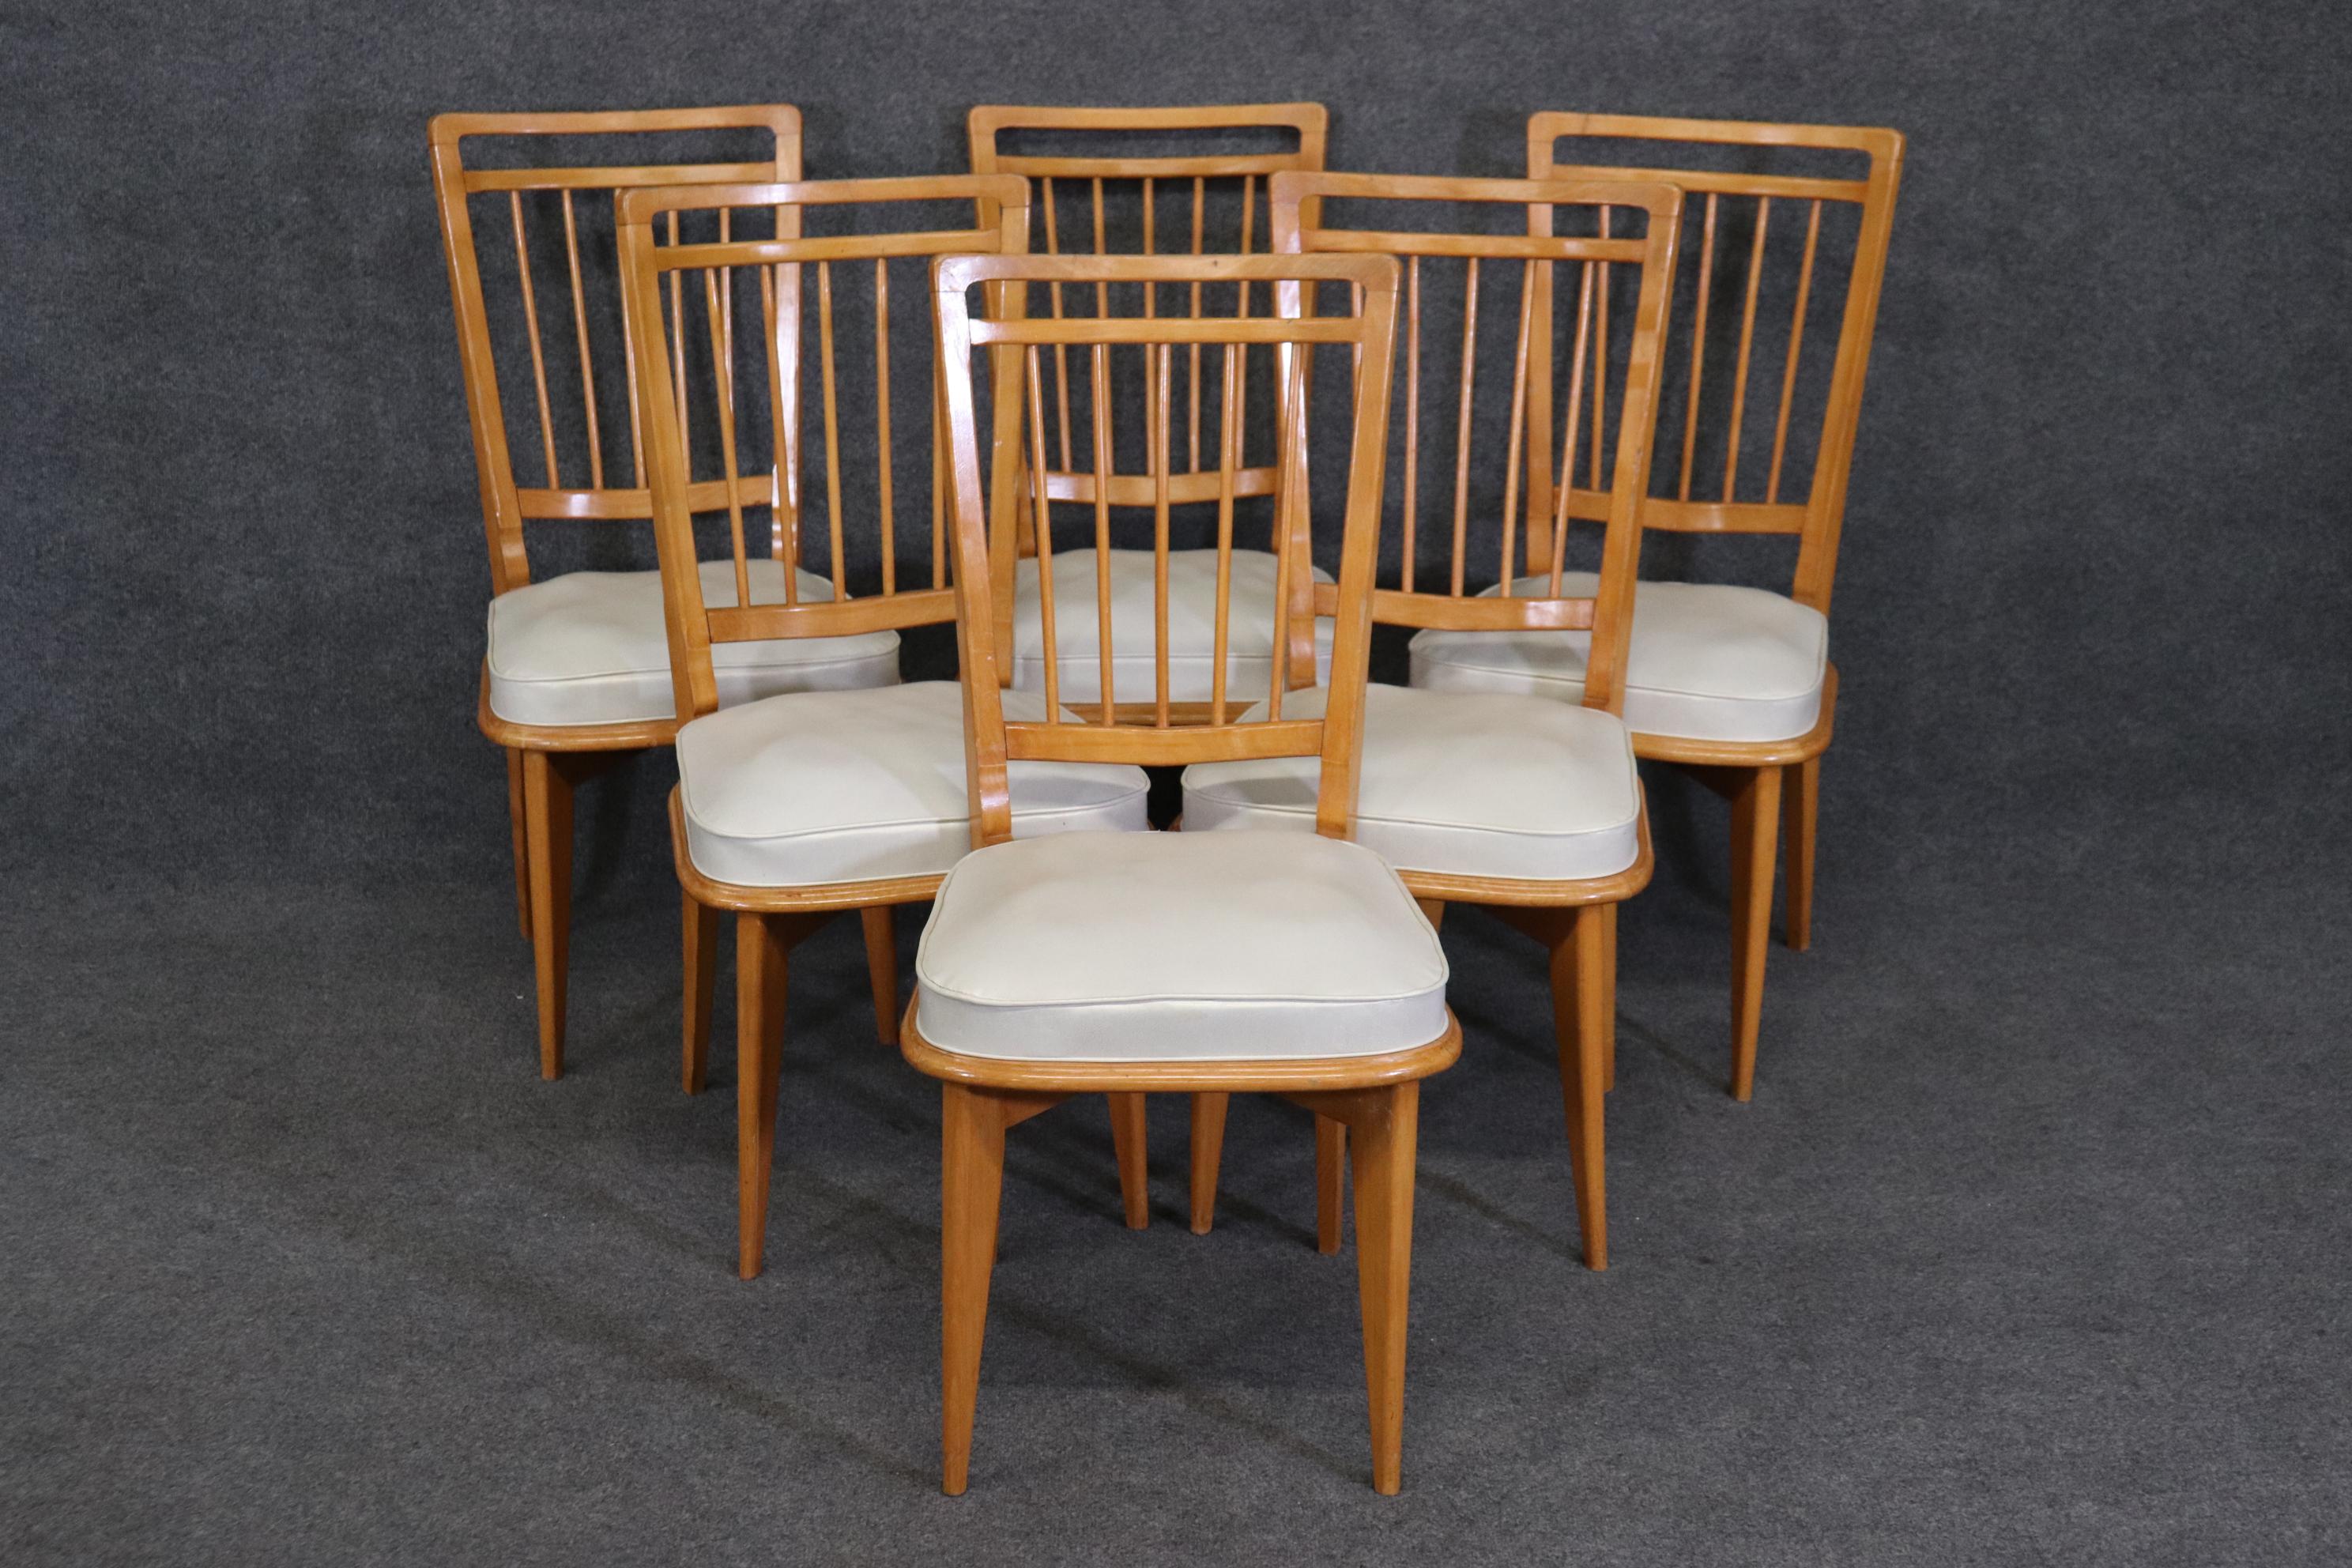 This is part of an entire set including a set of chairs, a sideboard, a china cabinet and a dining table. These are all listed separately and can be purchased for one negotiated price-just ask me to advertise a listing with all of these items and I